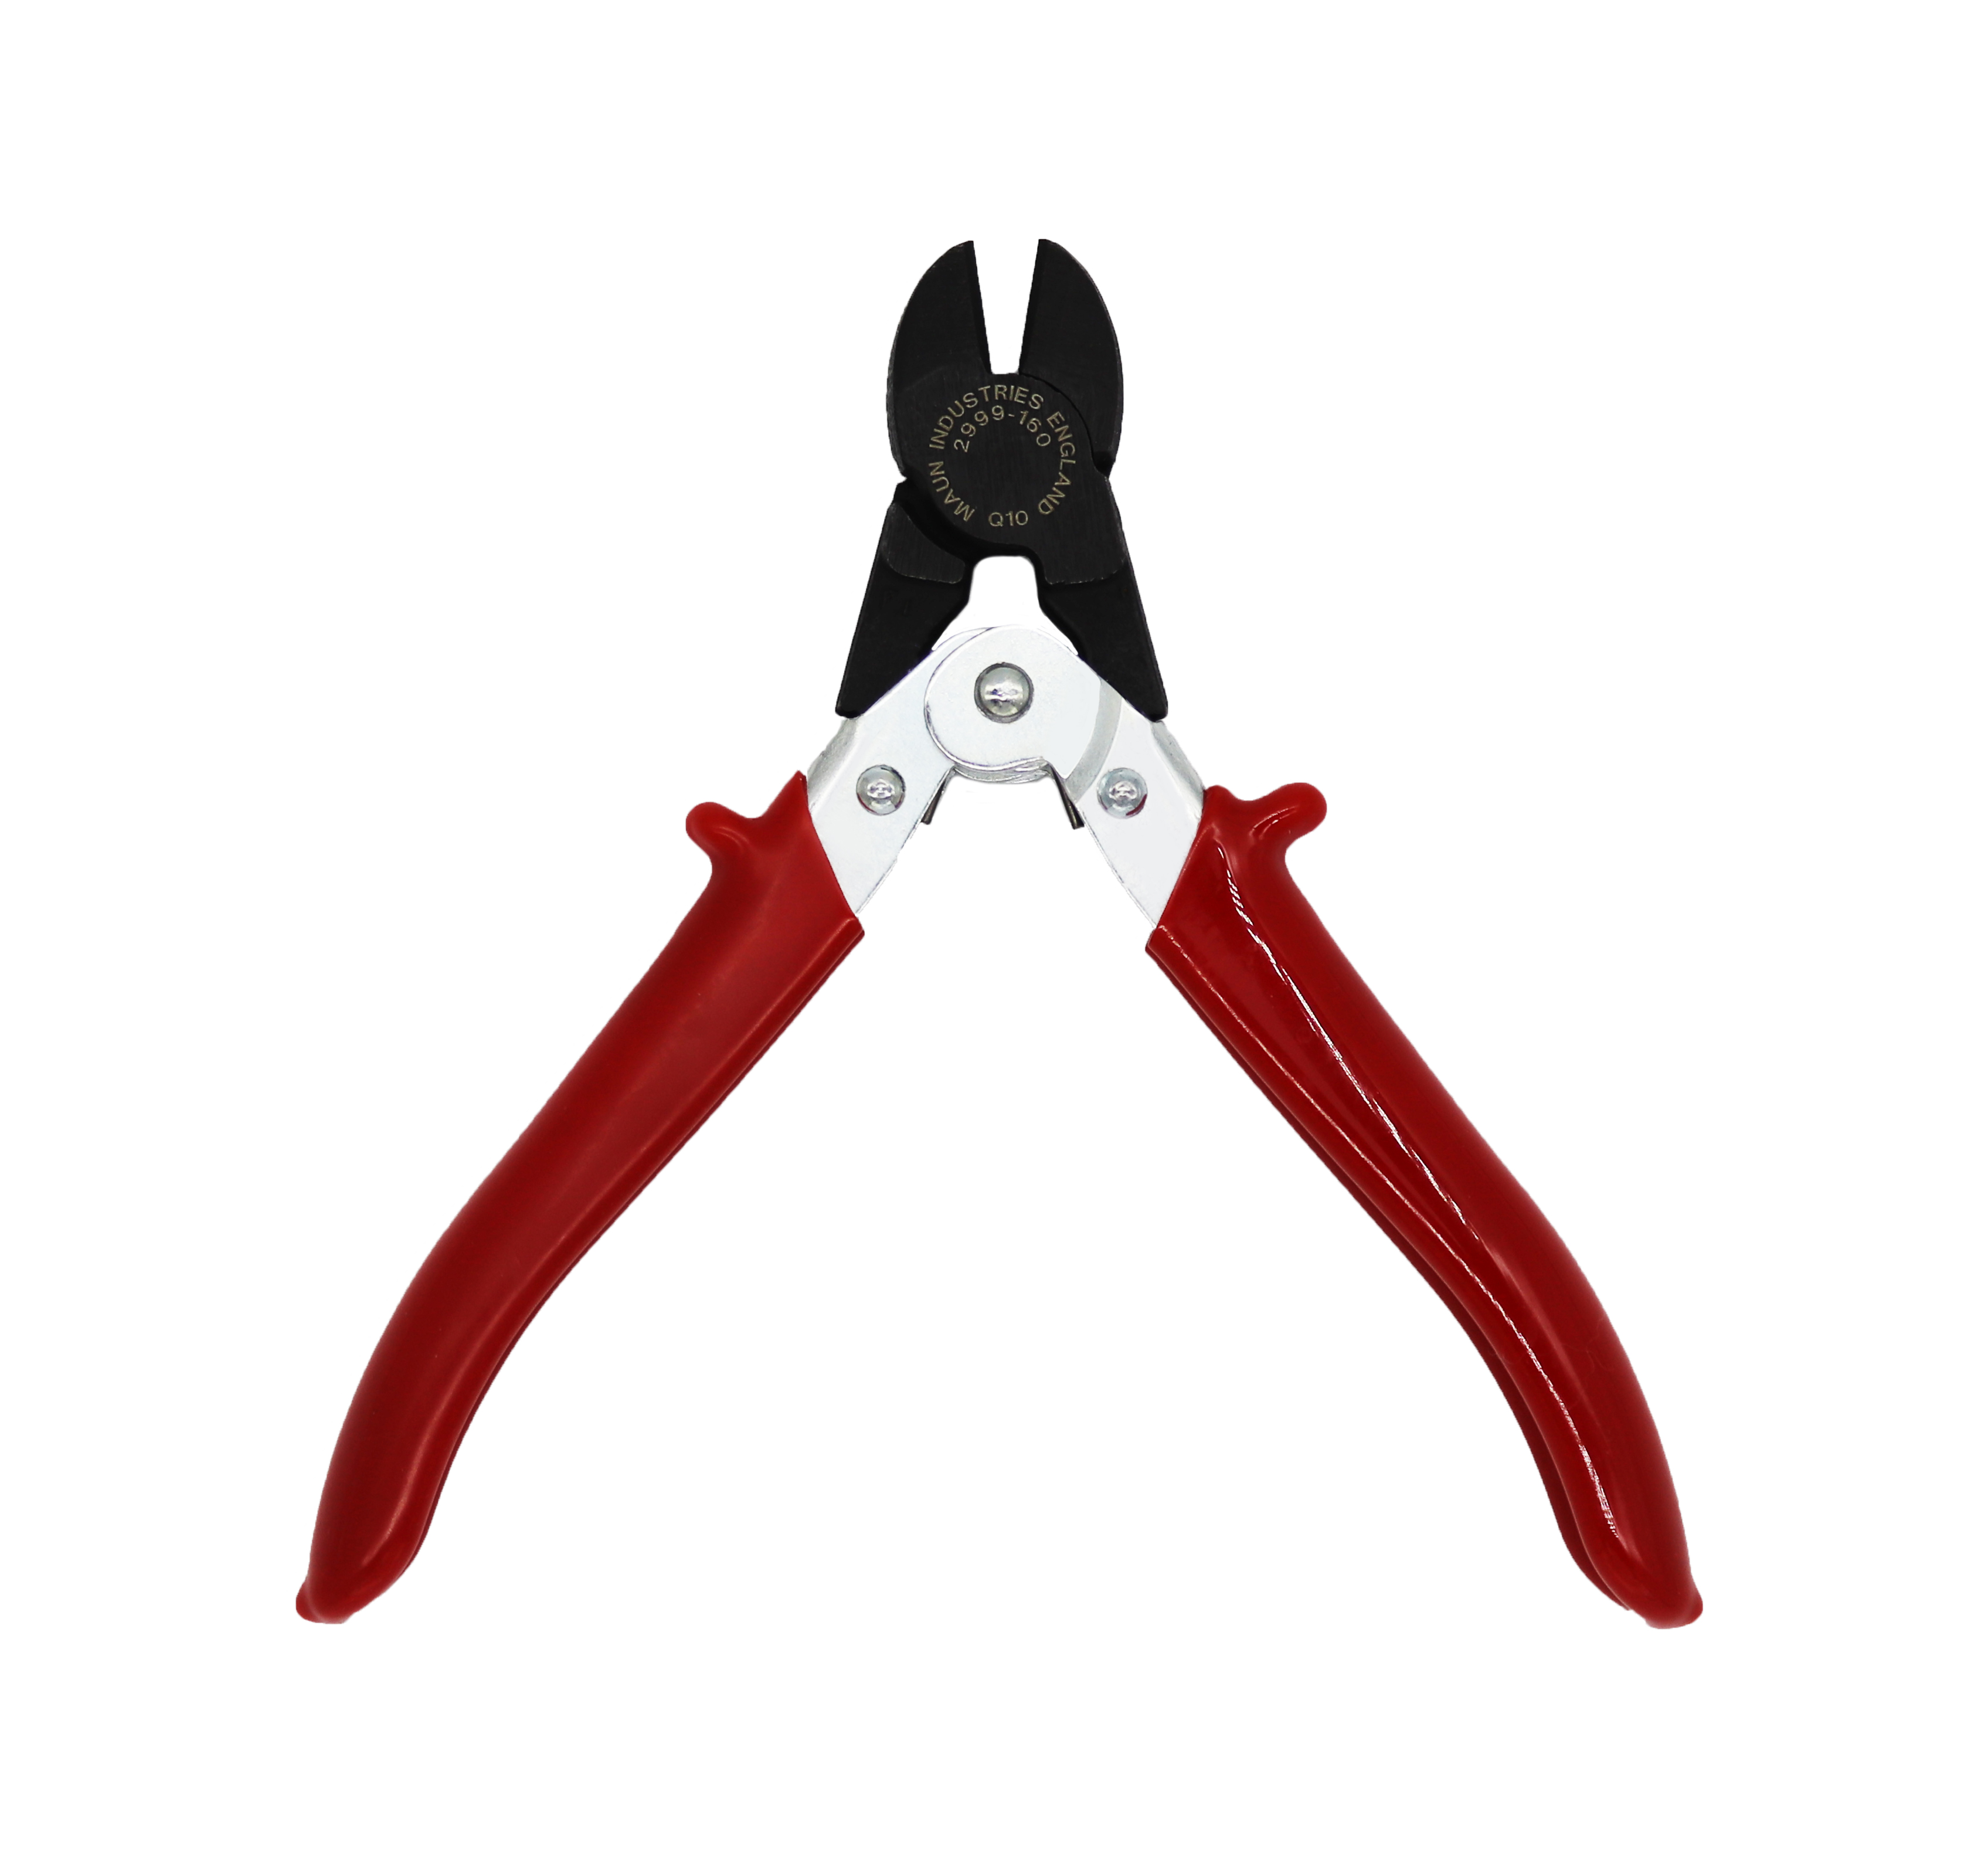 custom wire cutters, custom wire cutters Suppliers and Manufacturers at